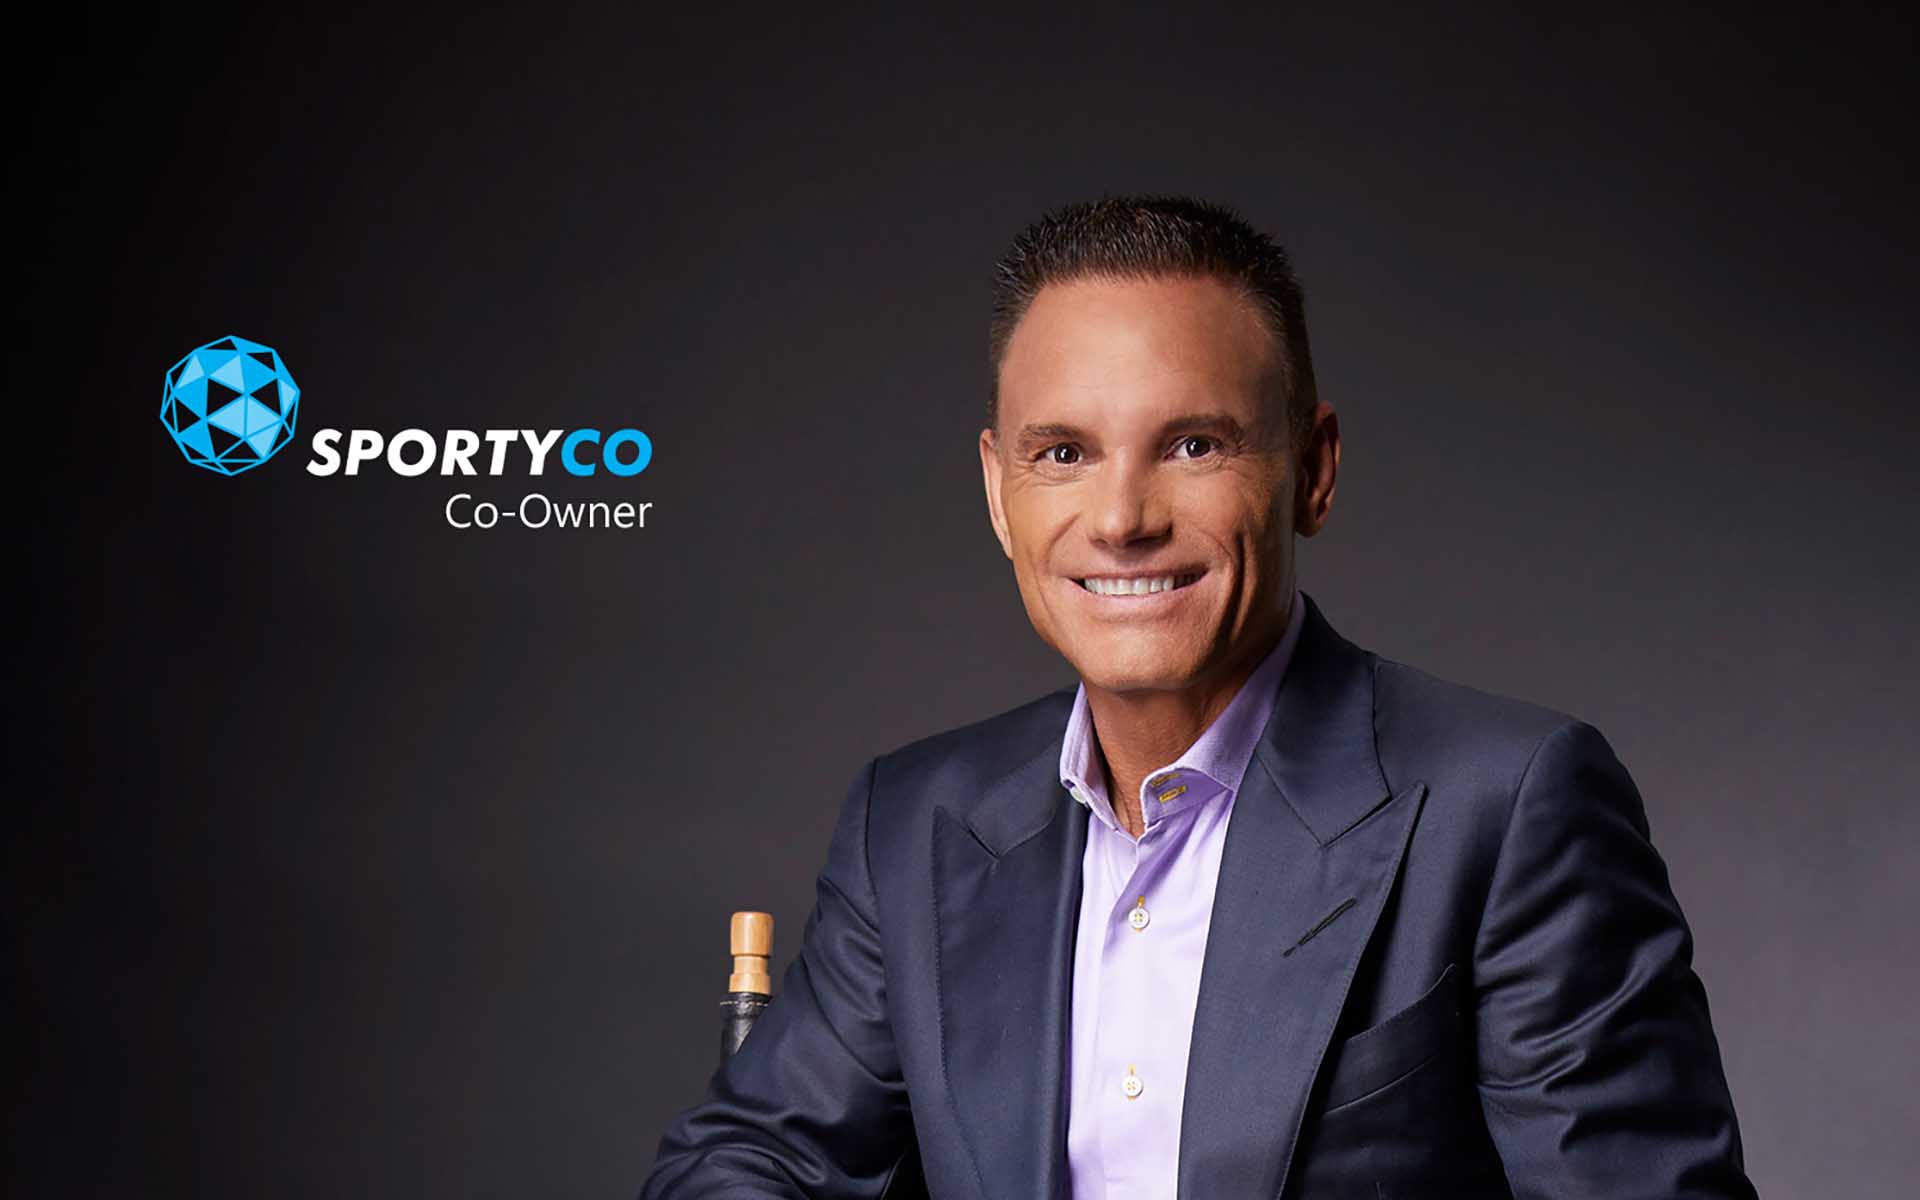 SportyCo Ups Their Game with the Addition of Kevin Harrington